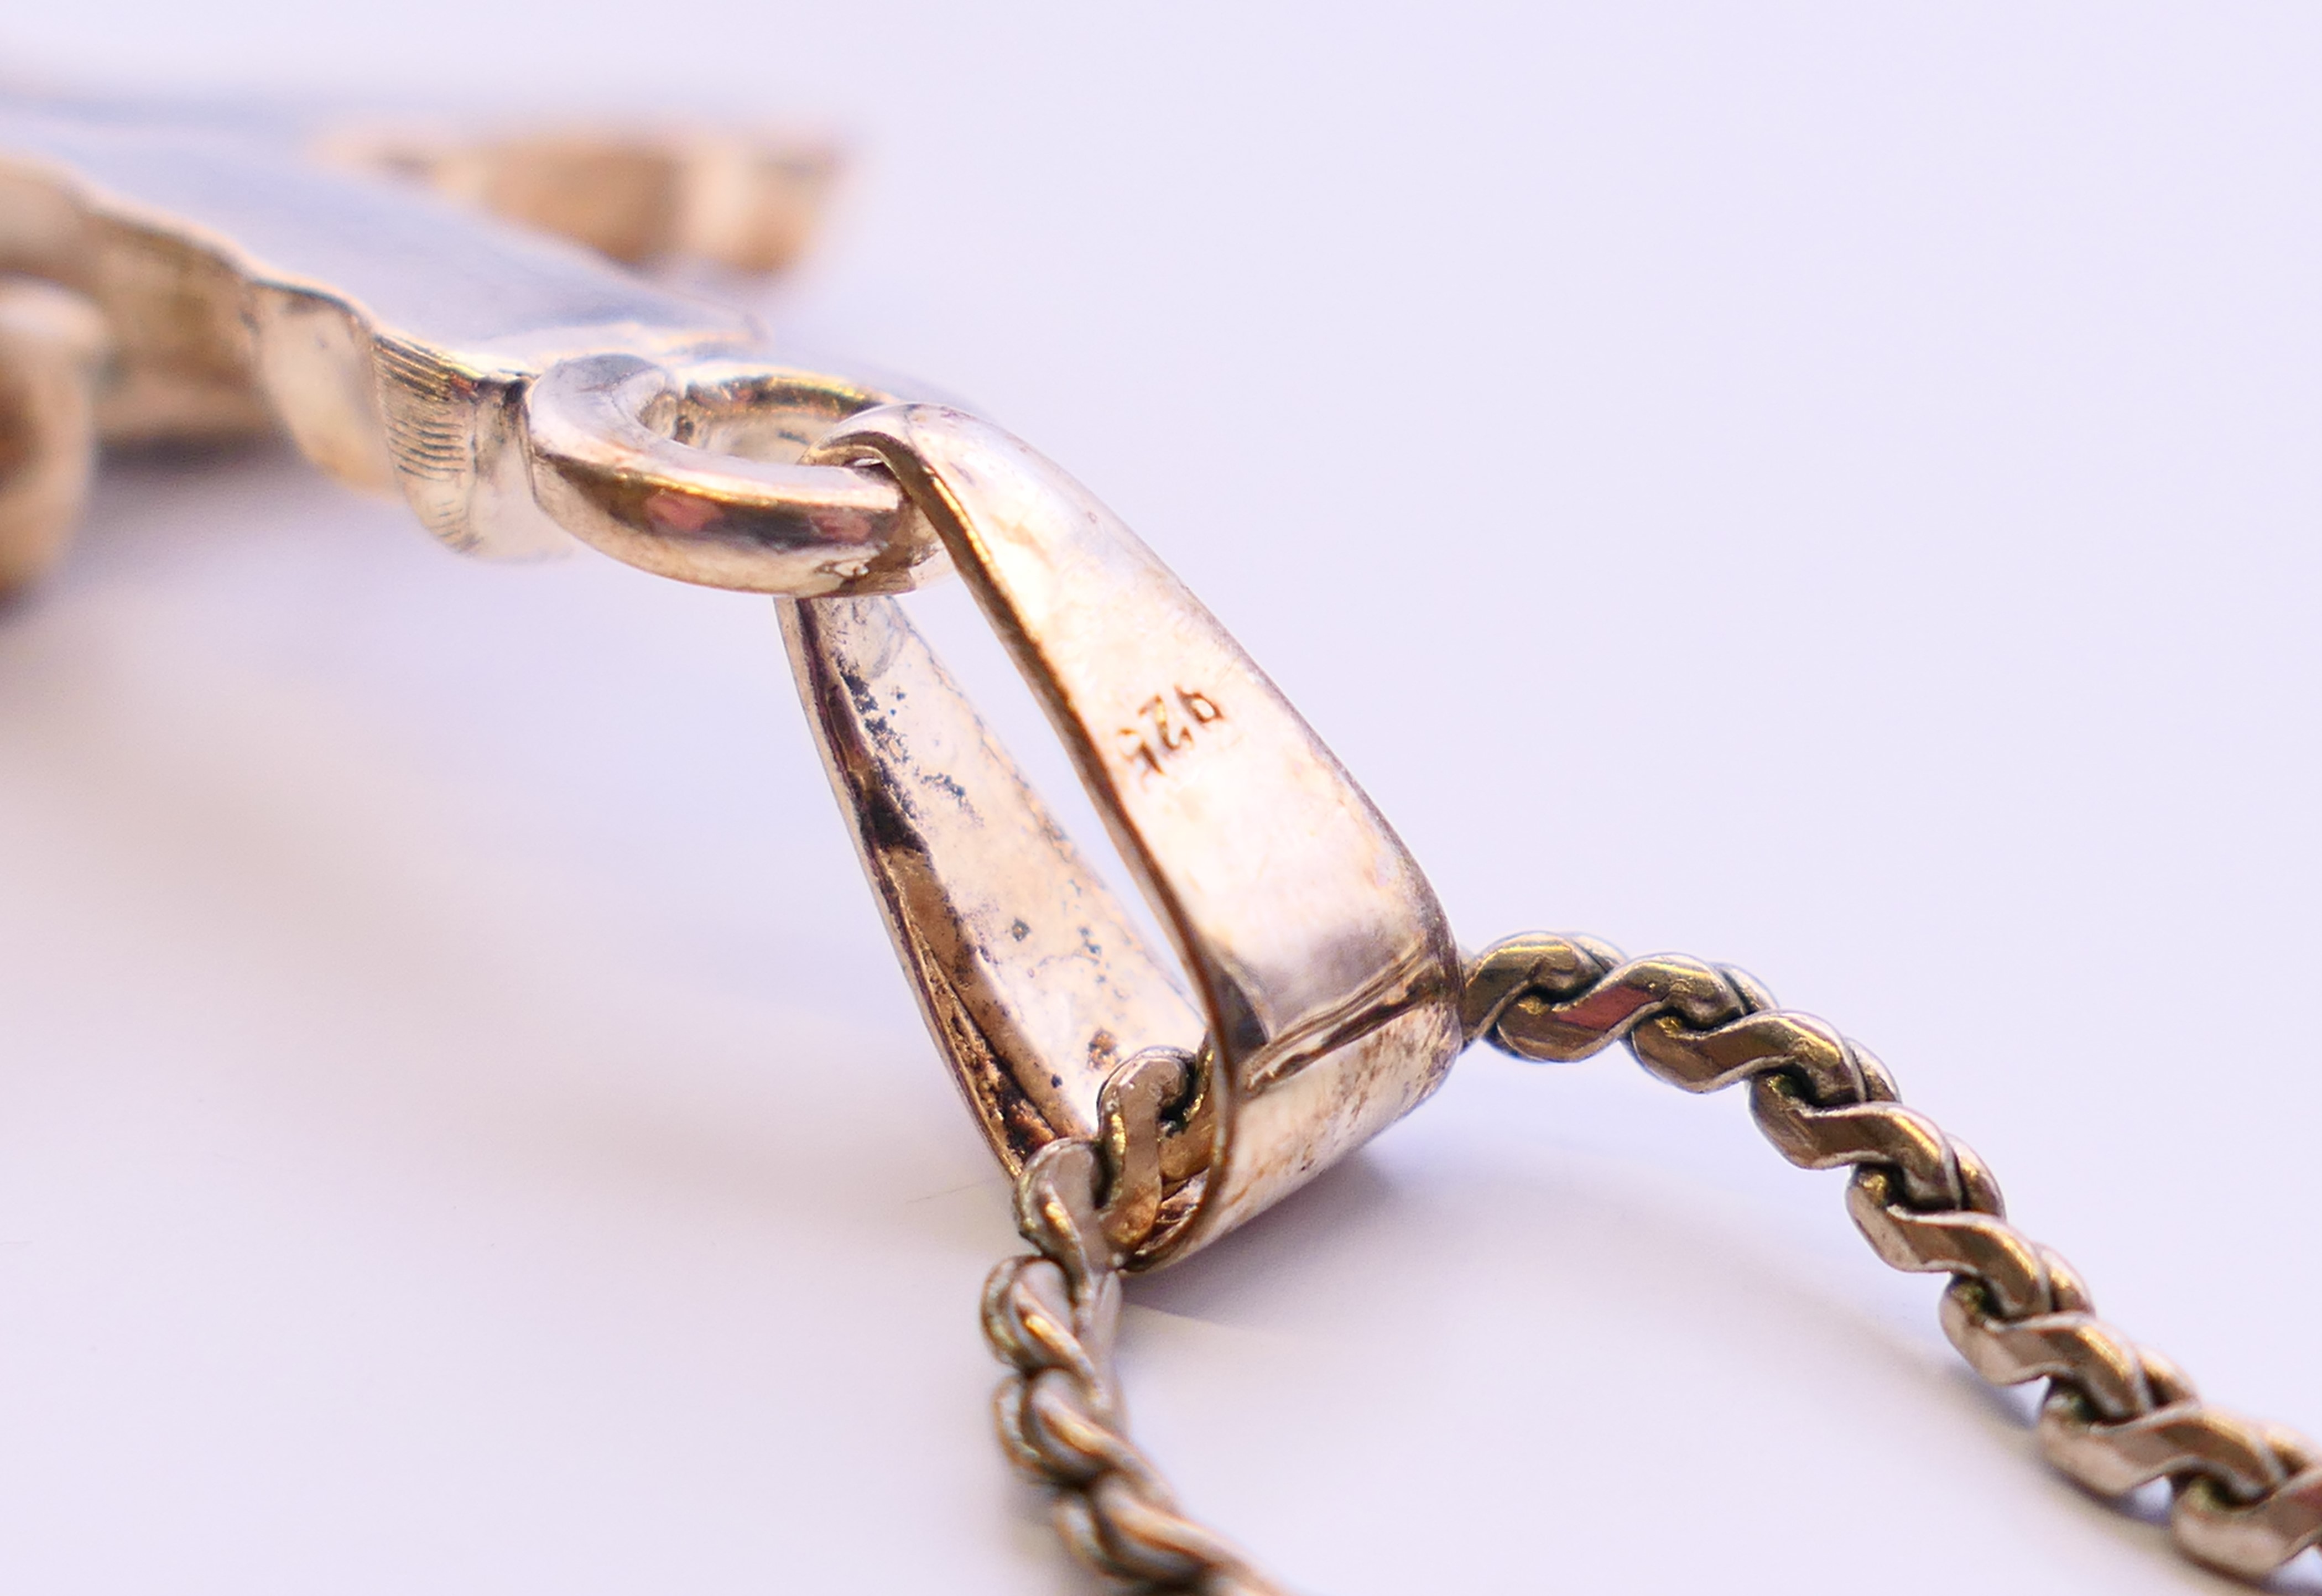 A silver crucifix on a silver chain. - Image 6 of 6